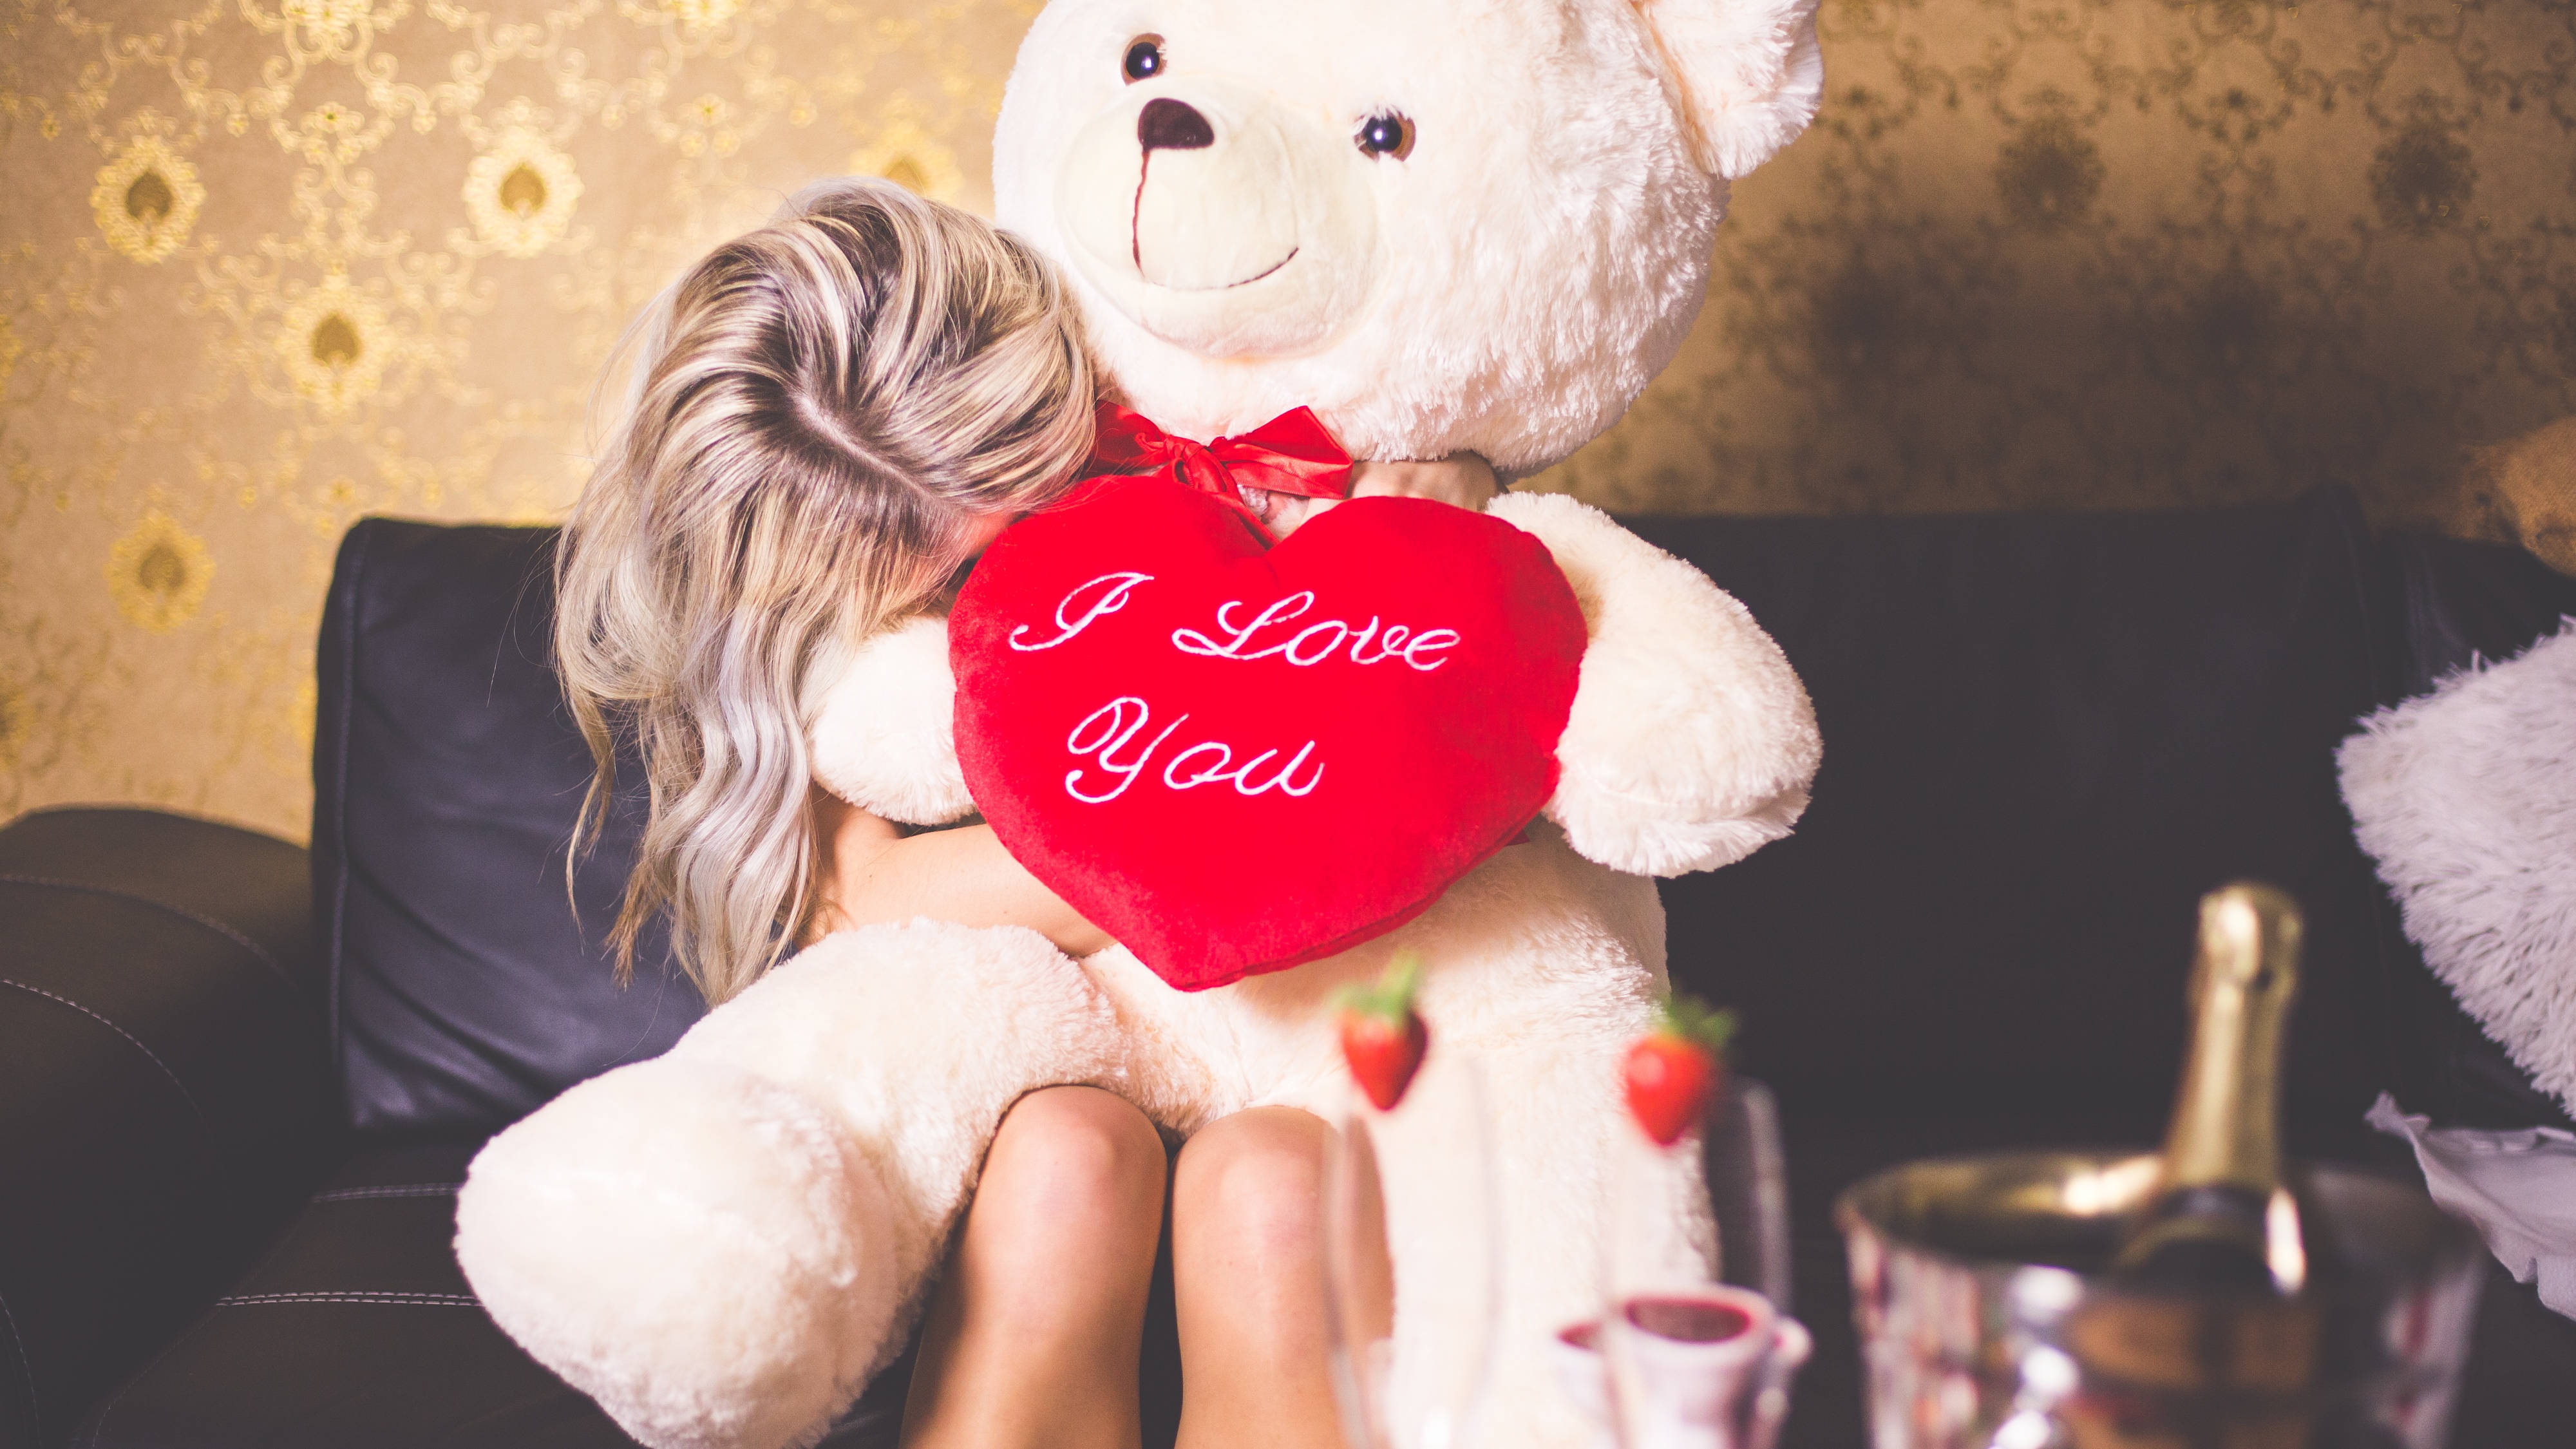 People 4000x2250 women blonde dyed hair teddy bears heart pillow couch strawberries champagne love red bow stuffed animal glasses bucket